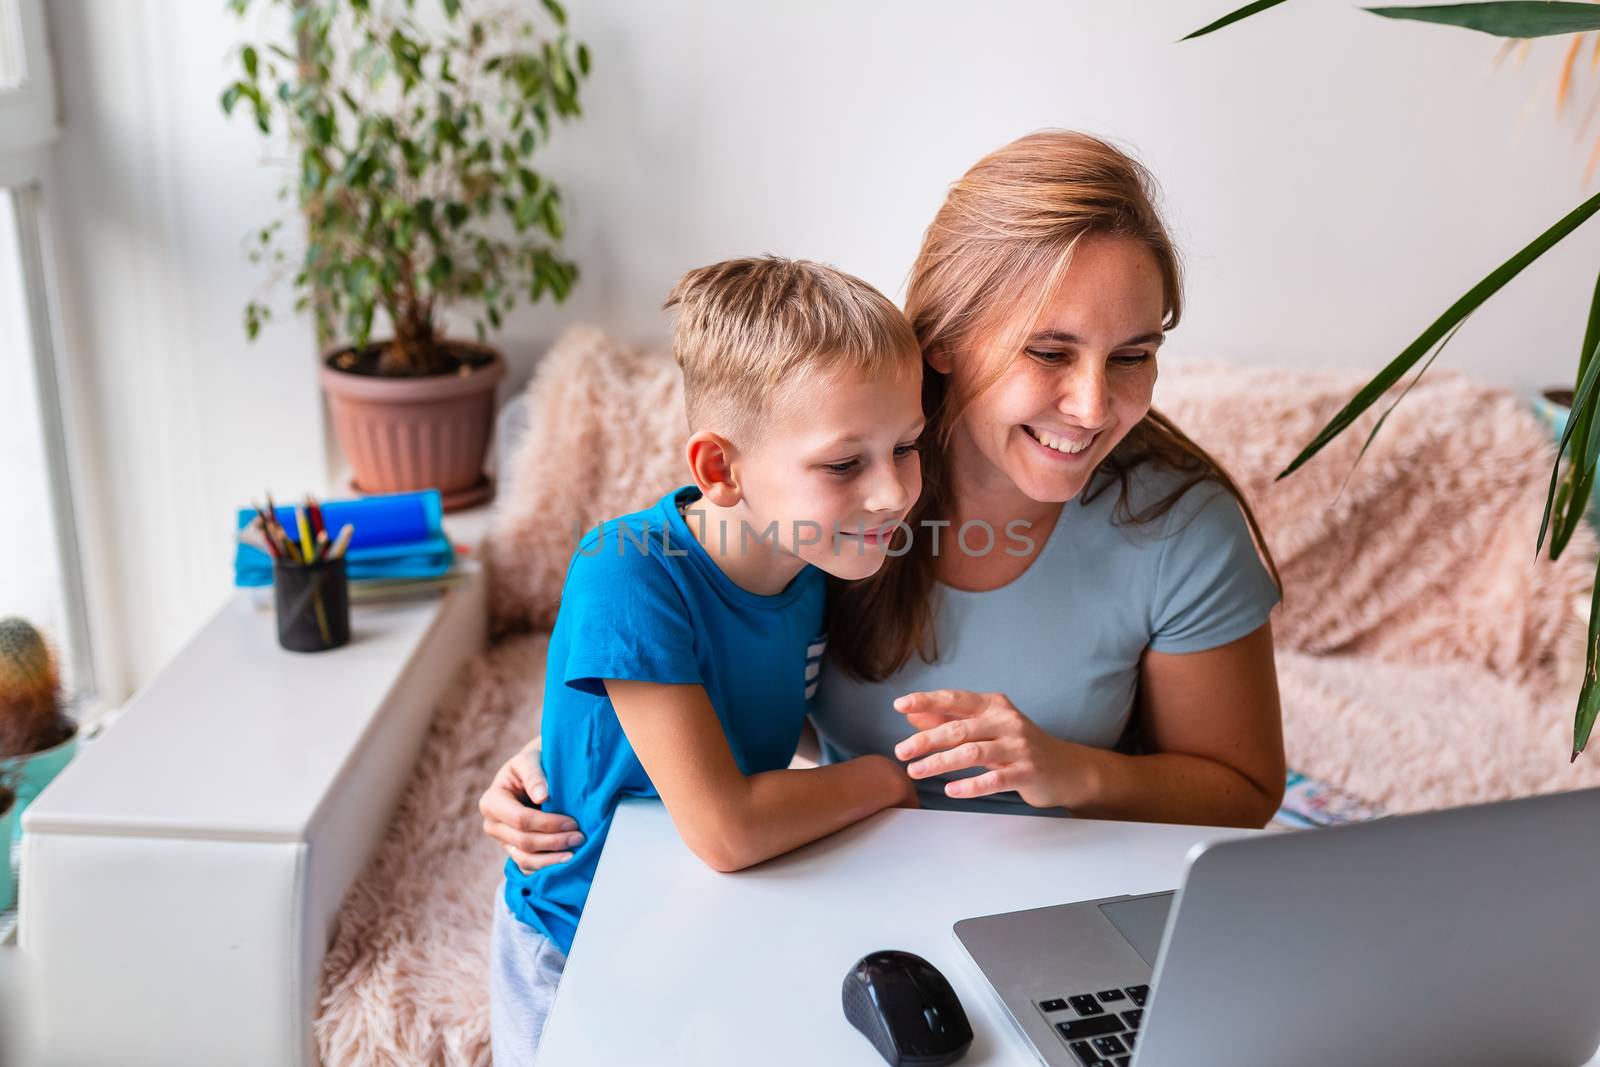 Mother with kid communicating online with relatives via video conferencing on laptop from home during quarantine. Distance communication concept during coronavirus pandemic